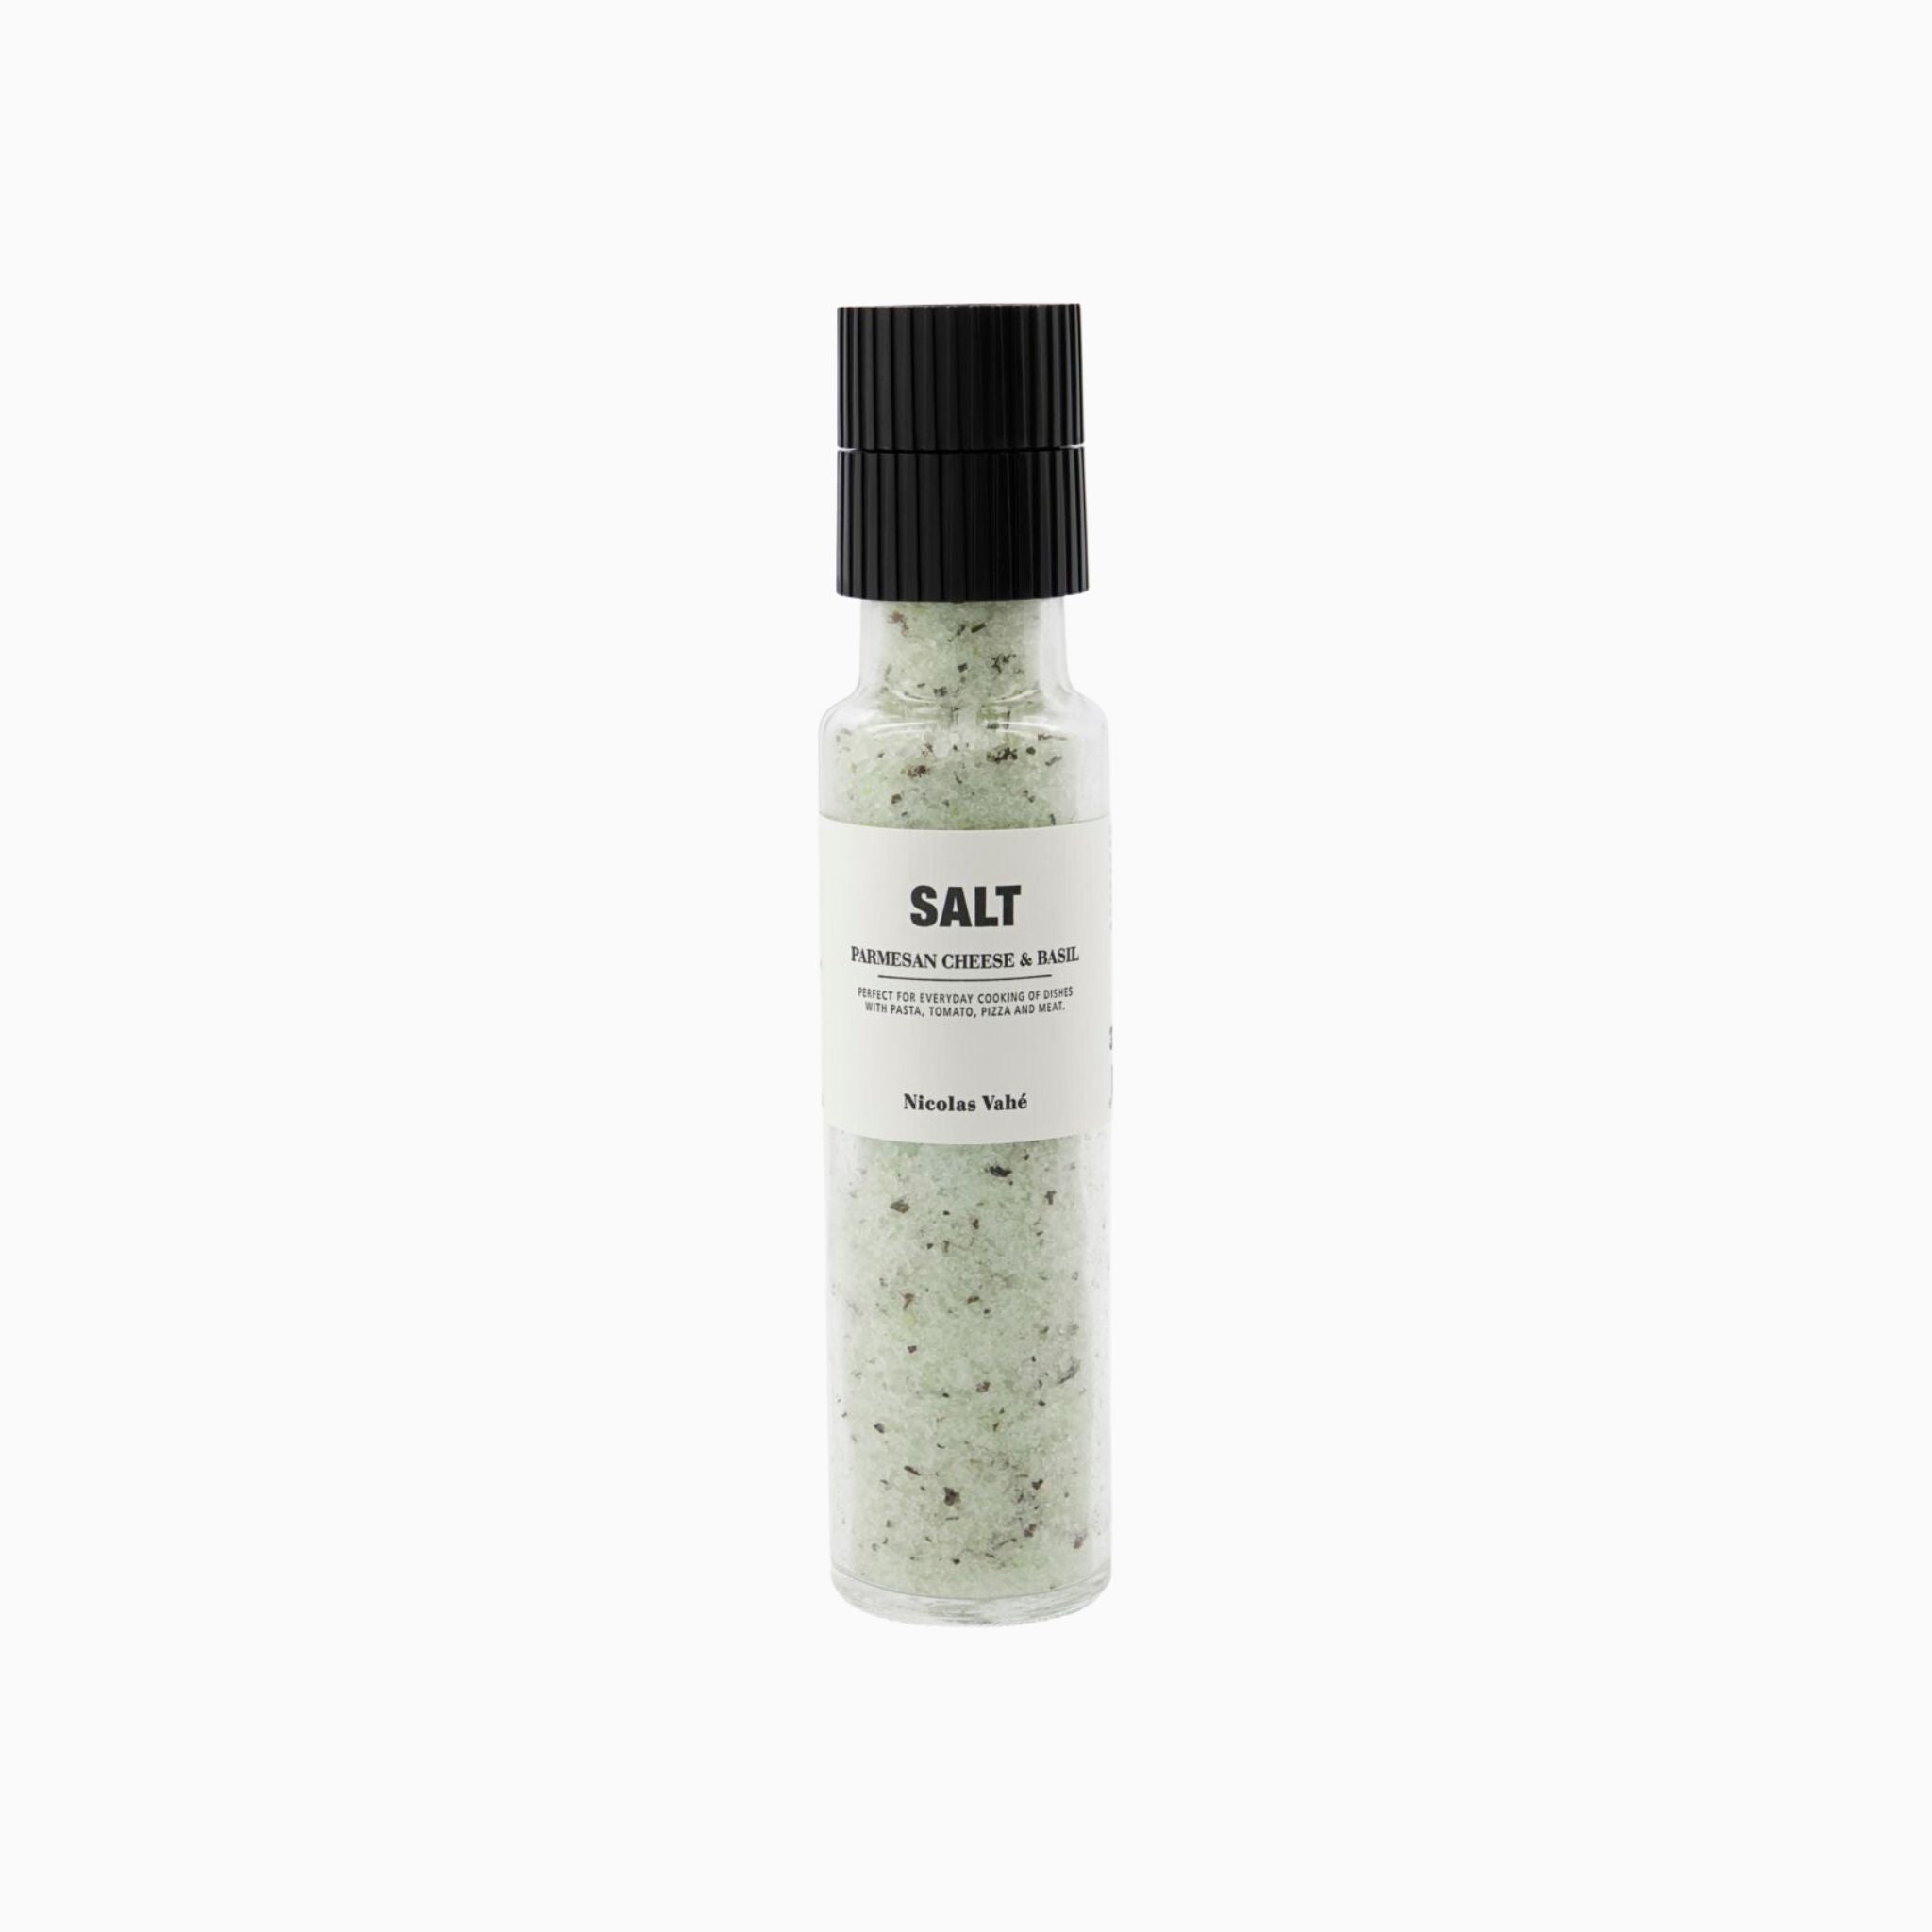 Simply Elevated - This popular salt with parmesan cheese and basil is an essential item in any kitchen. This salt is especially good with pasta dishes and pizza. The salt comes in a handy grinder with two settings - a fine and coarse setting. 